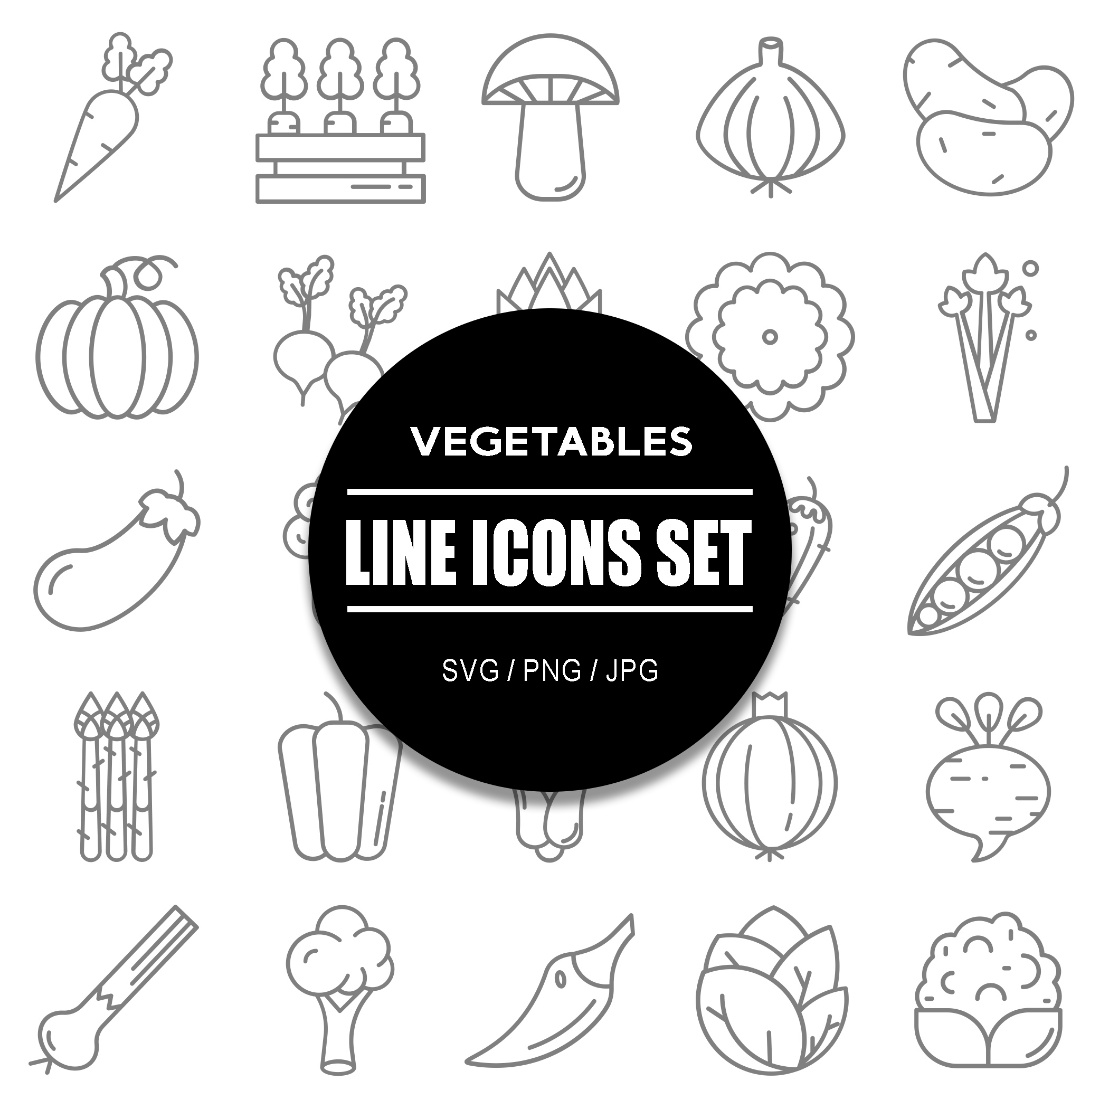 Vegetables Line Icon Set cover image.